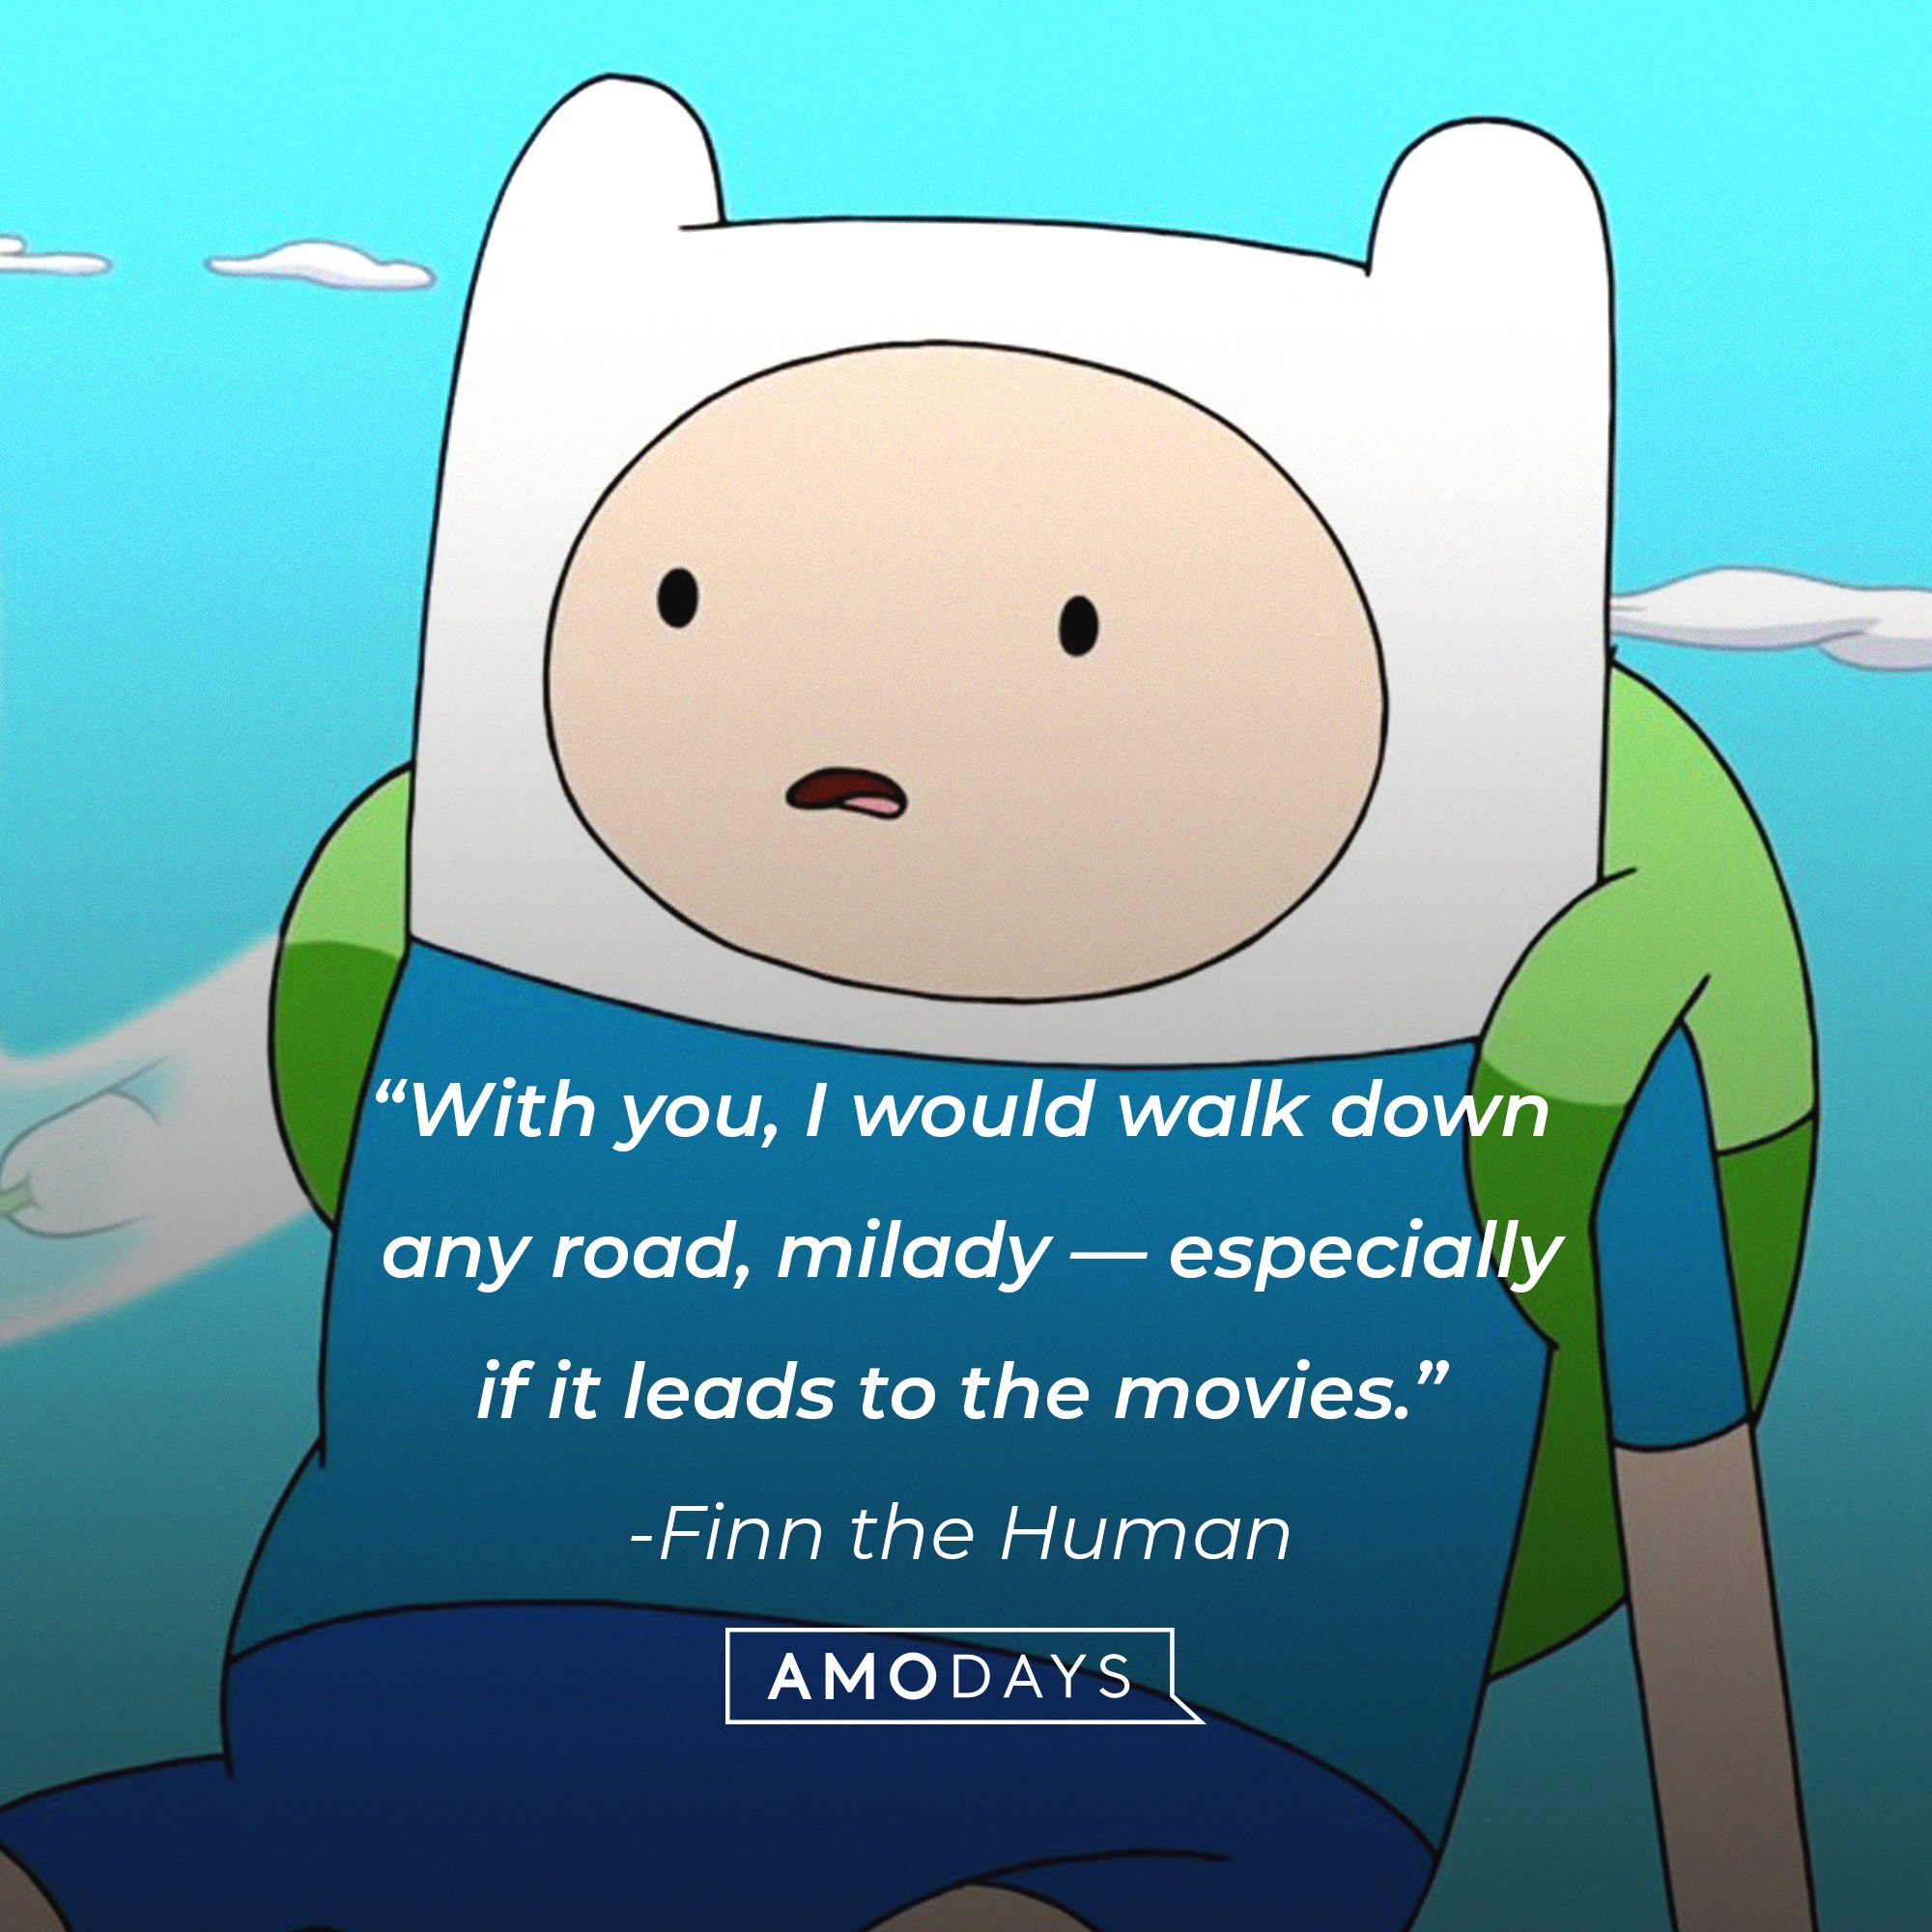   Finn the Human’s quote: “With you, I would walk down any road, milady — especially if it leads to the movies.” | Image: AmoDays